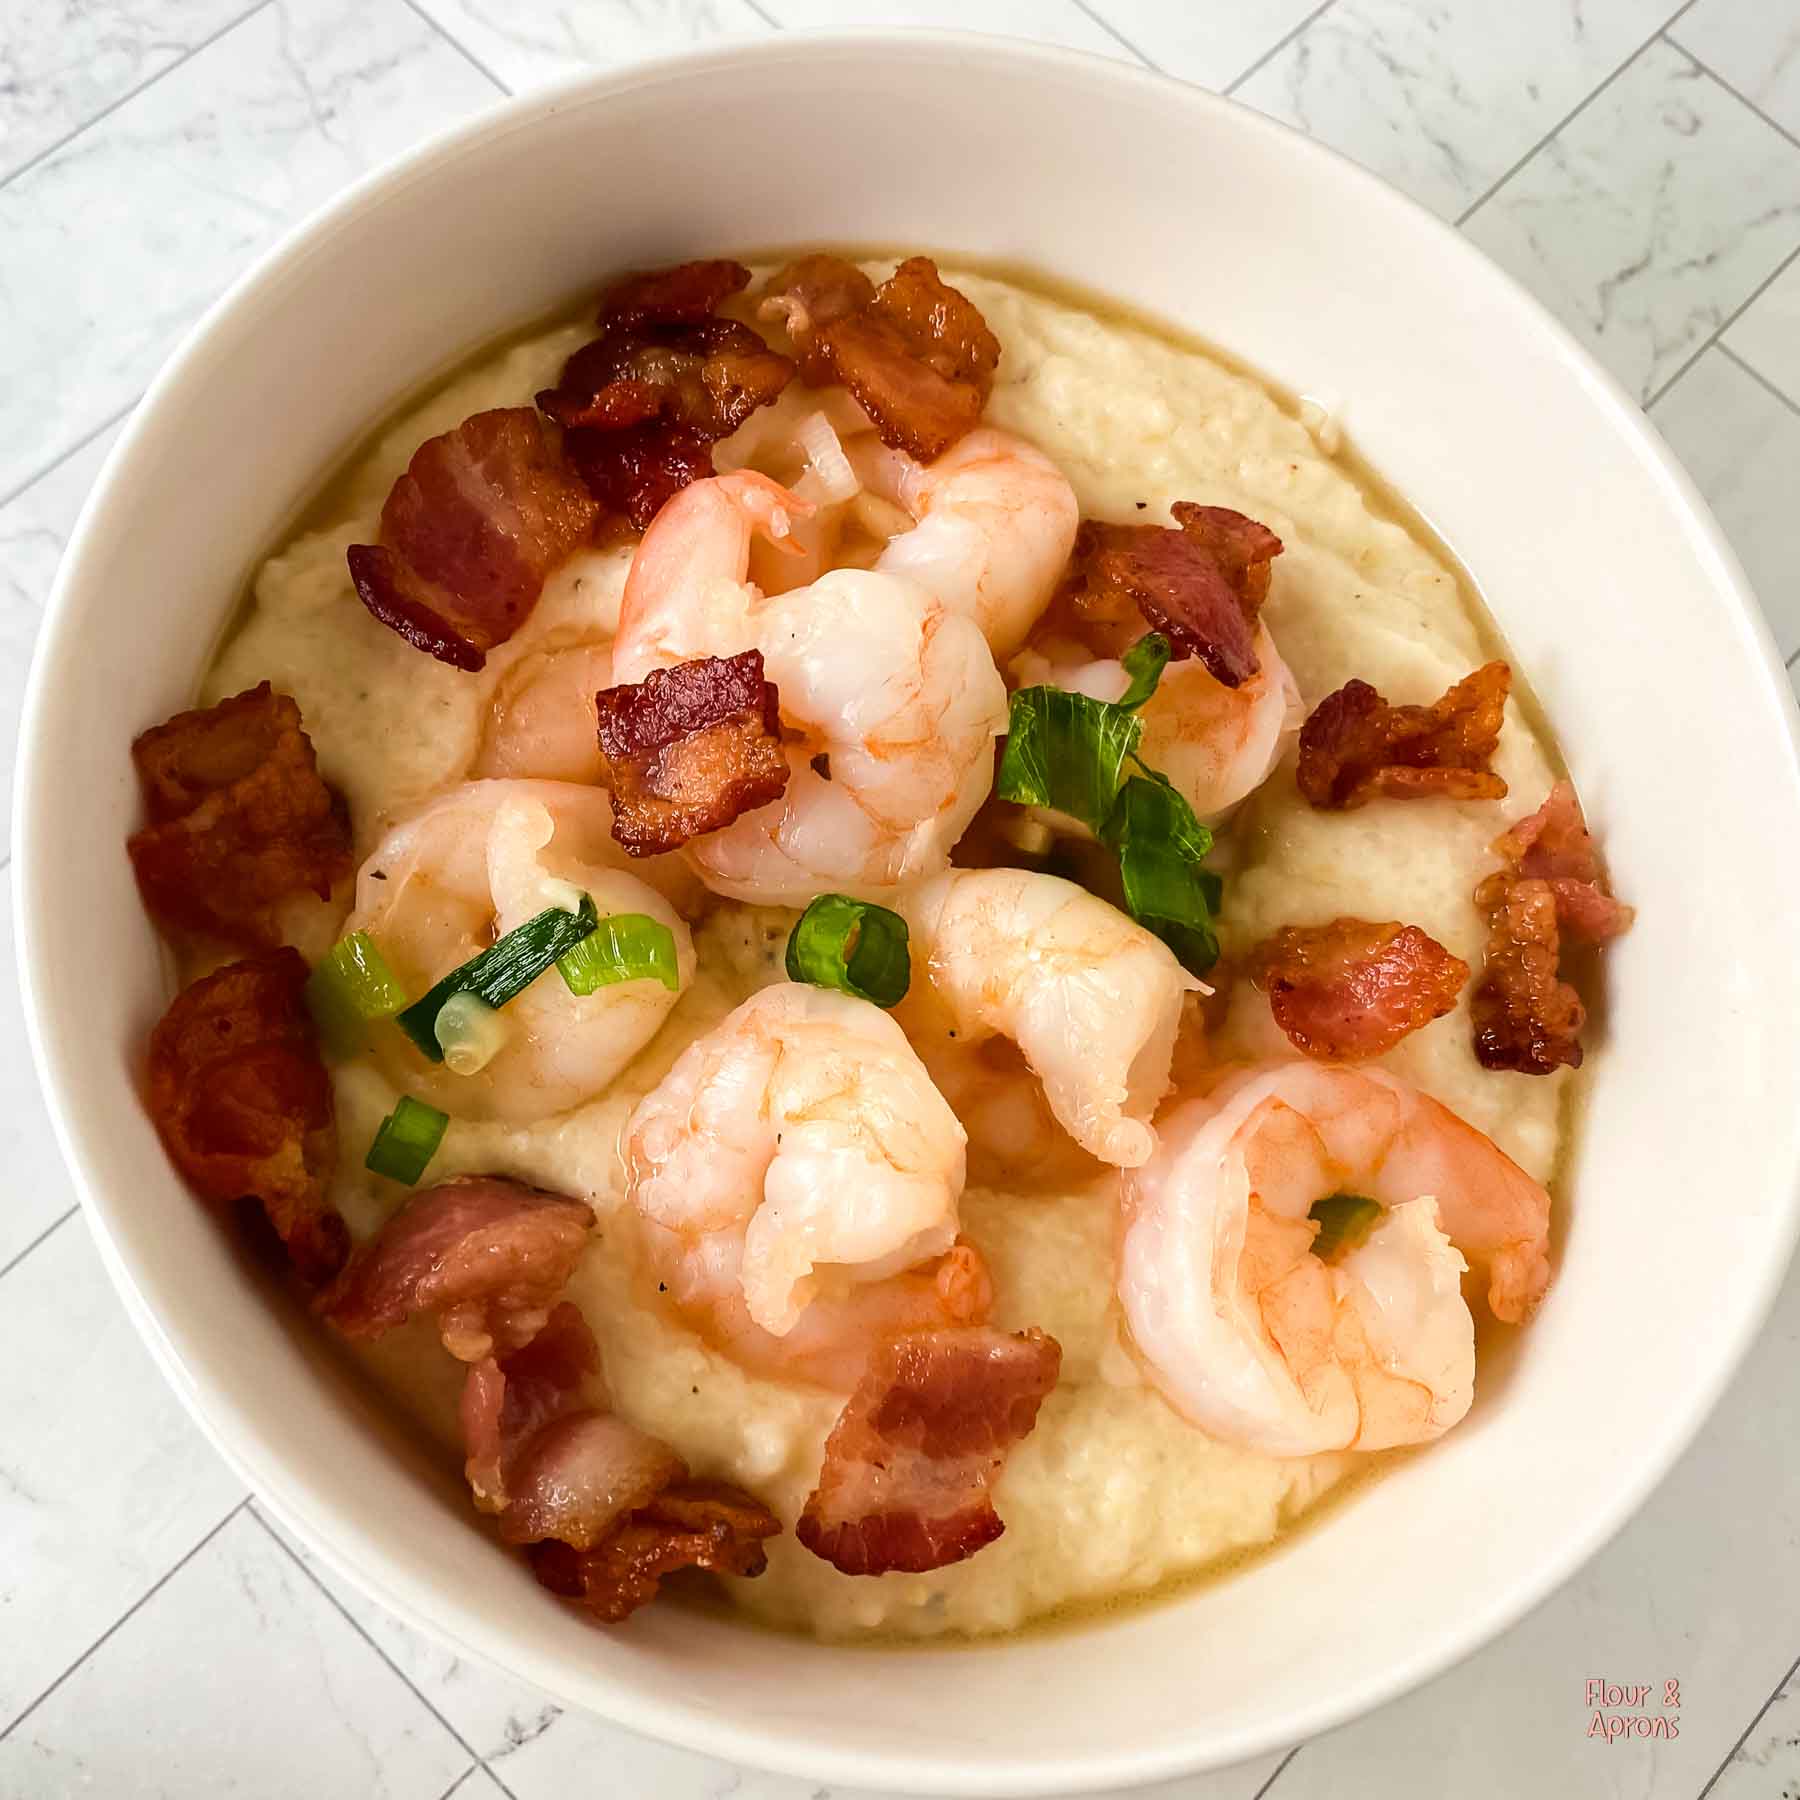 Top down view of a bowl of shrimp and Grits.